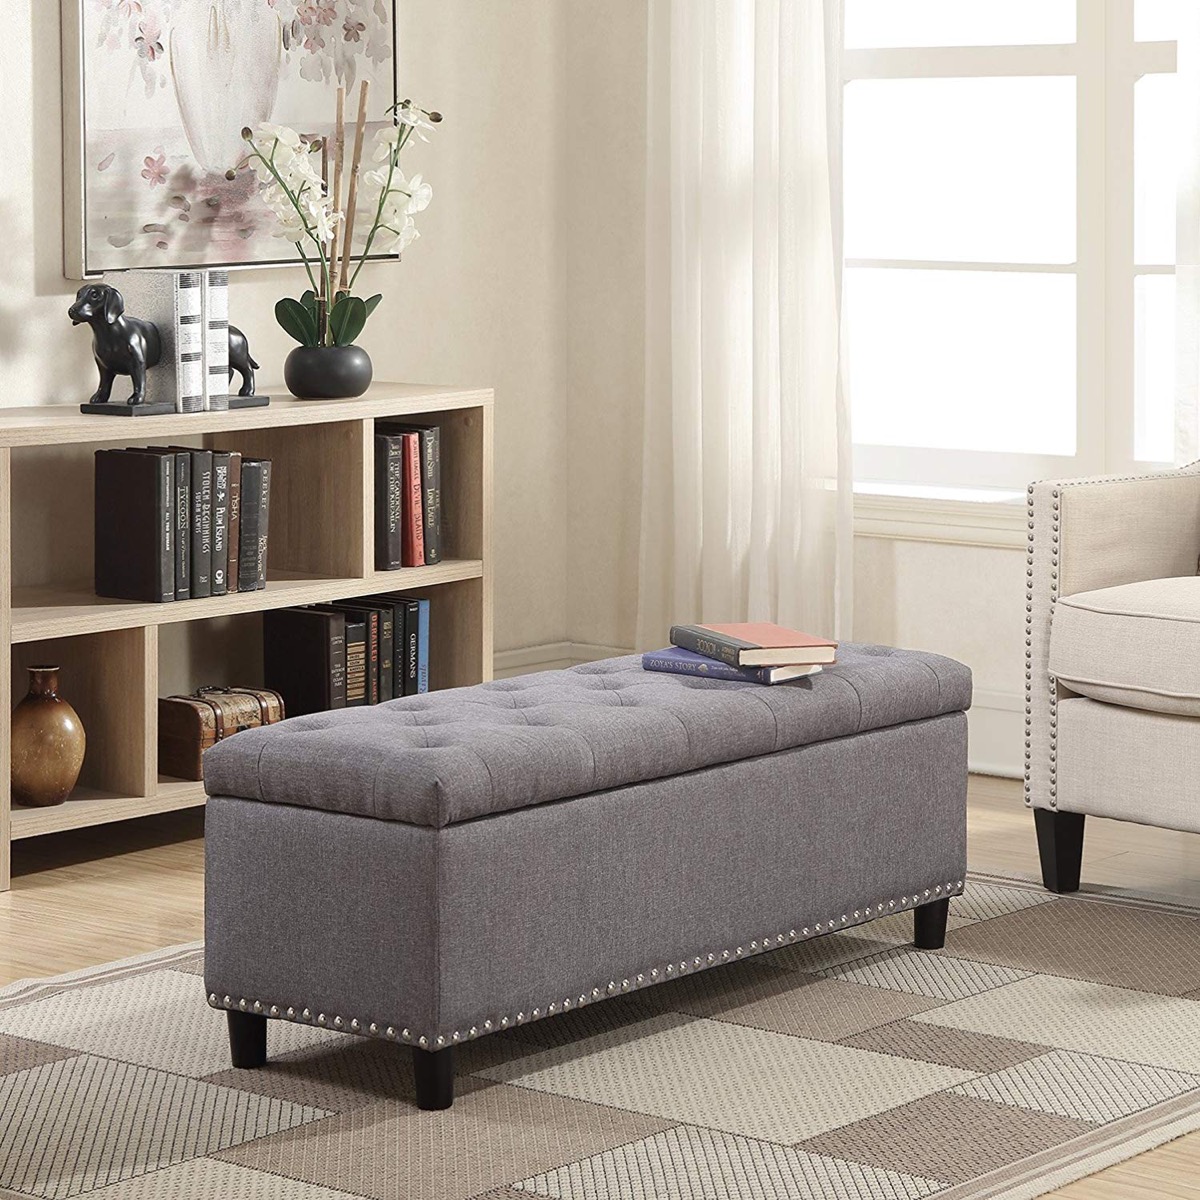 51 Storage Benches To Streamline Your, Living Room Bench Seating With Storage